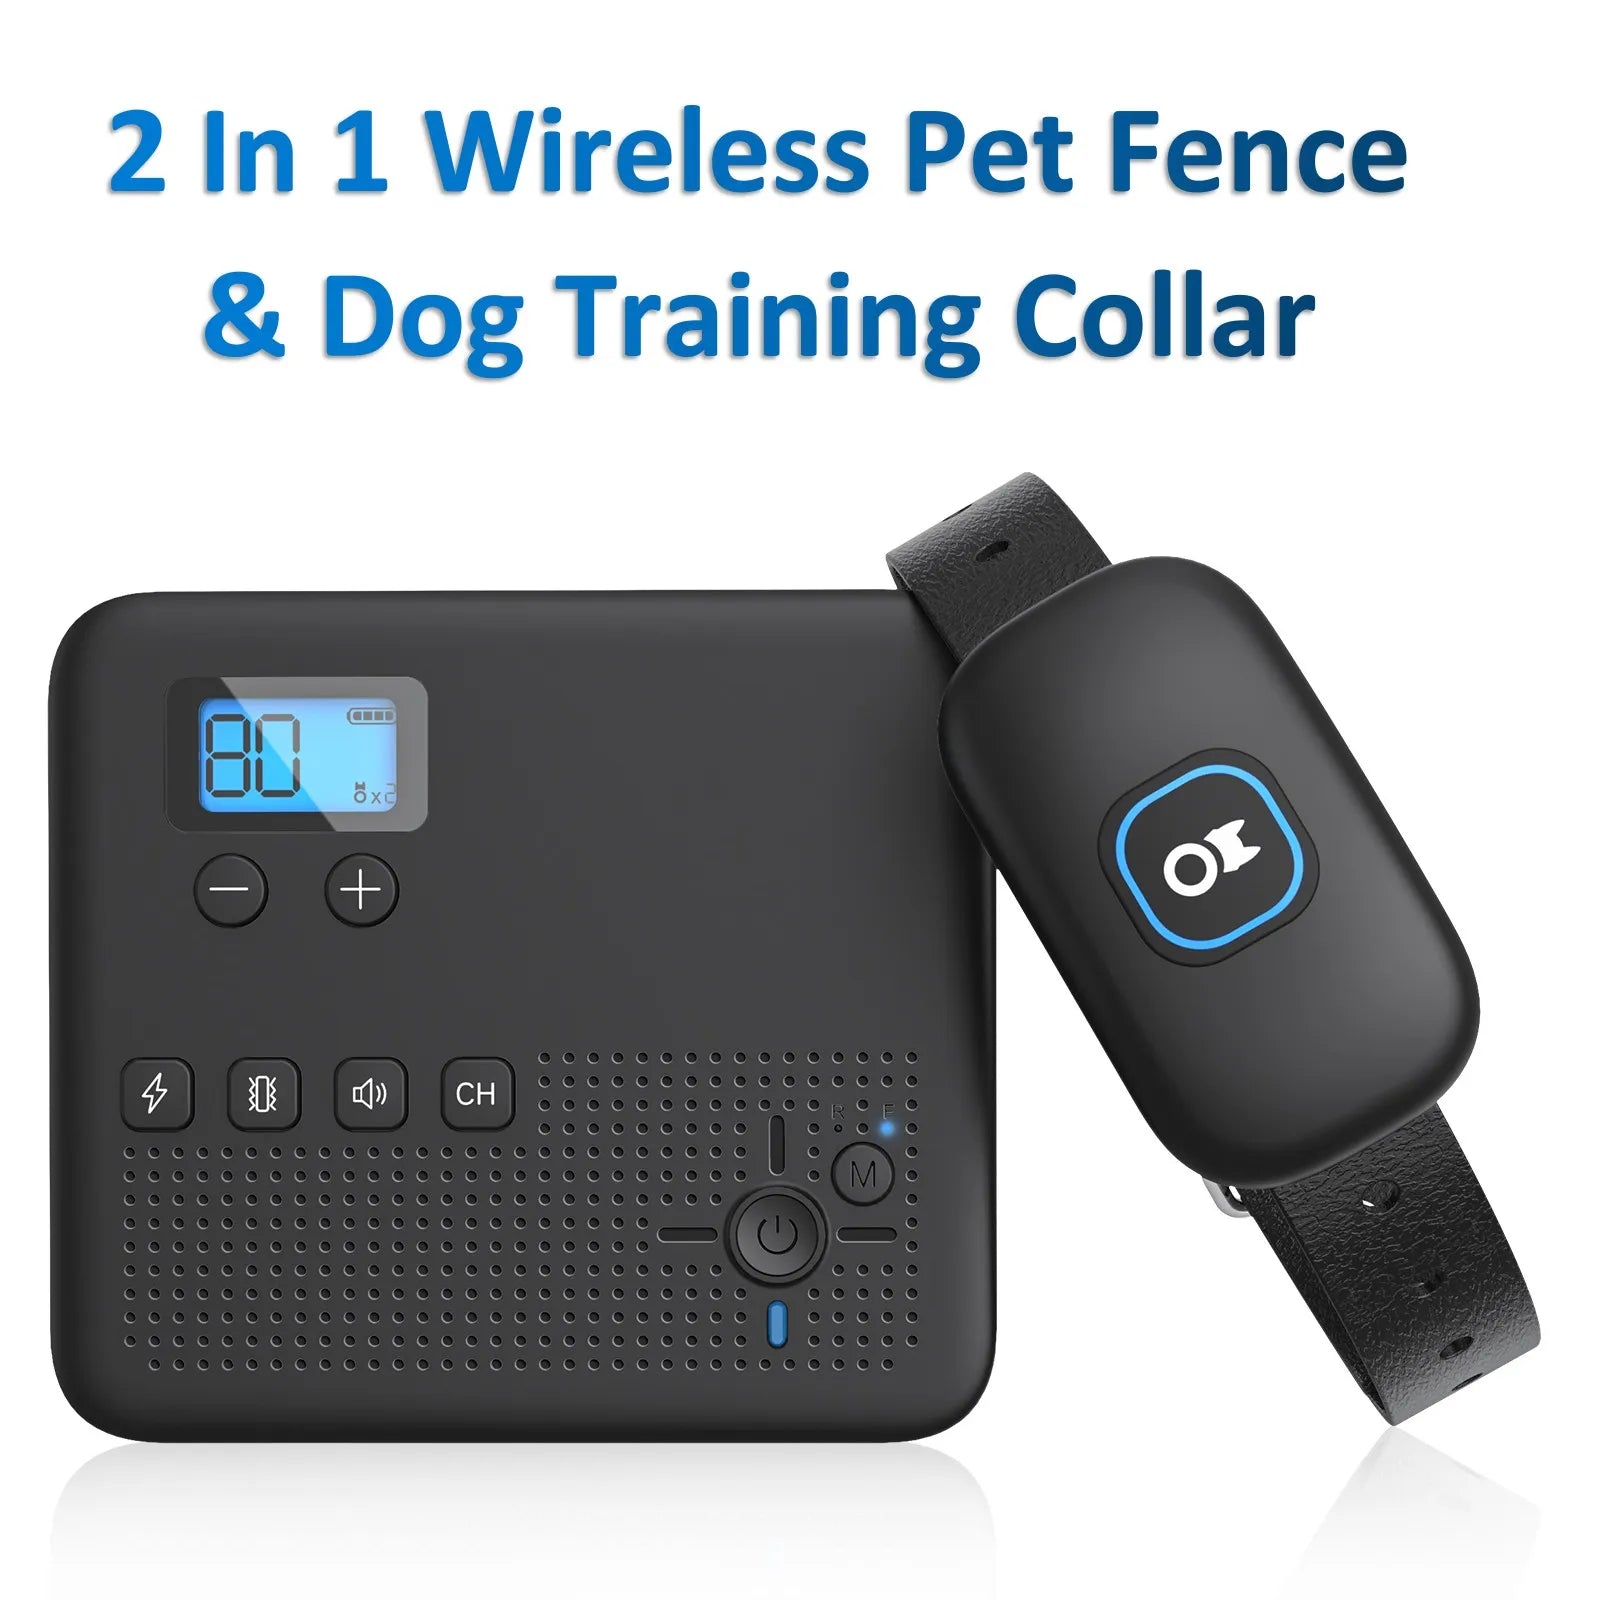 2-in-1 Electric Pet Wireless Fence and Dog Training Collar